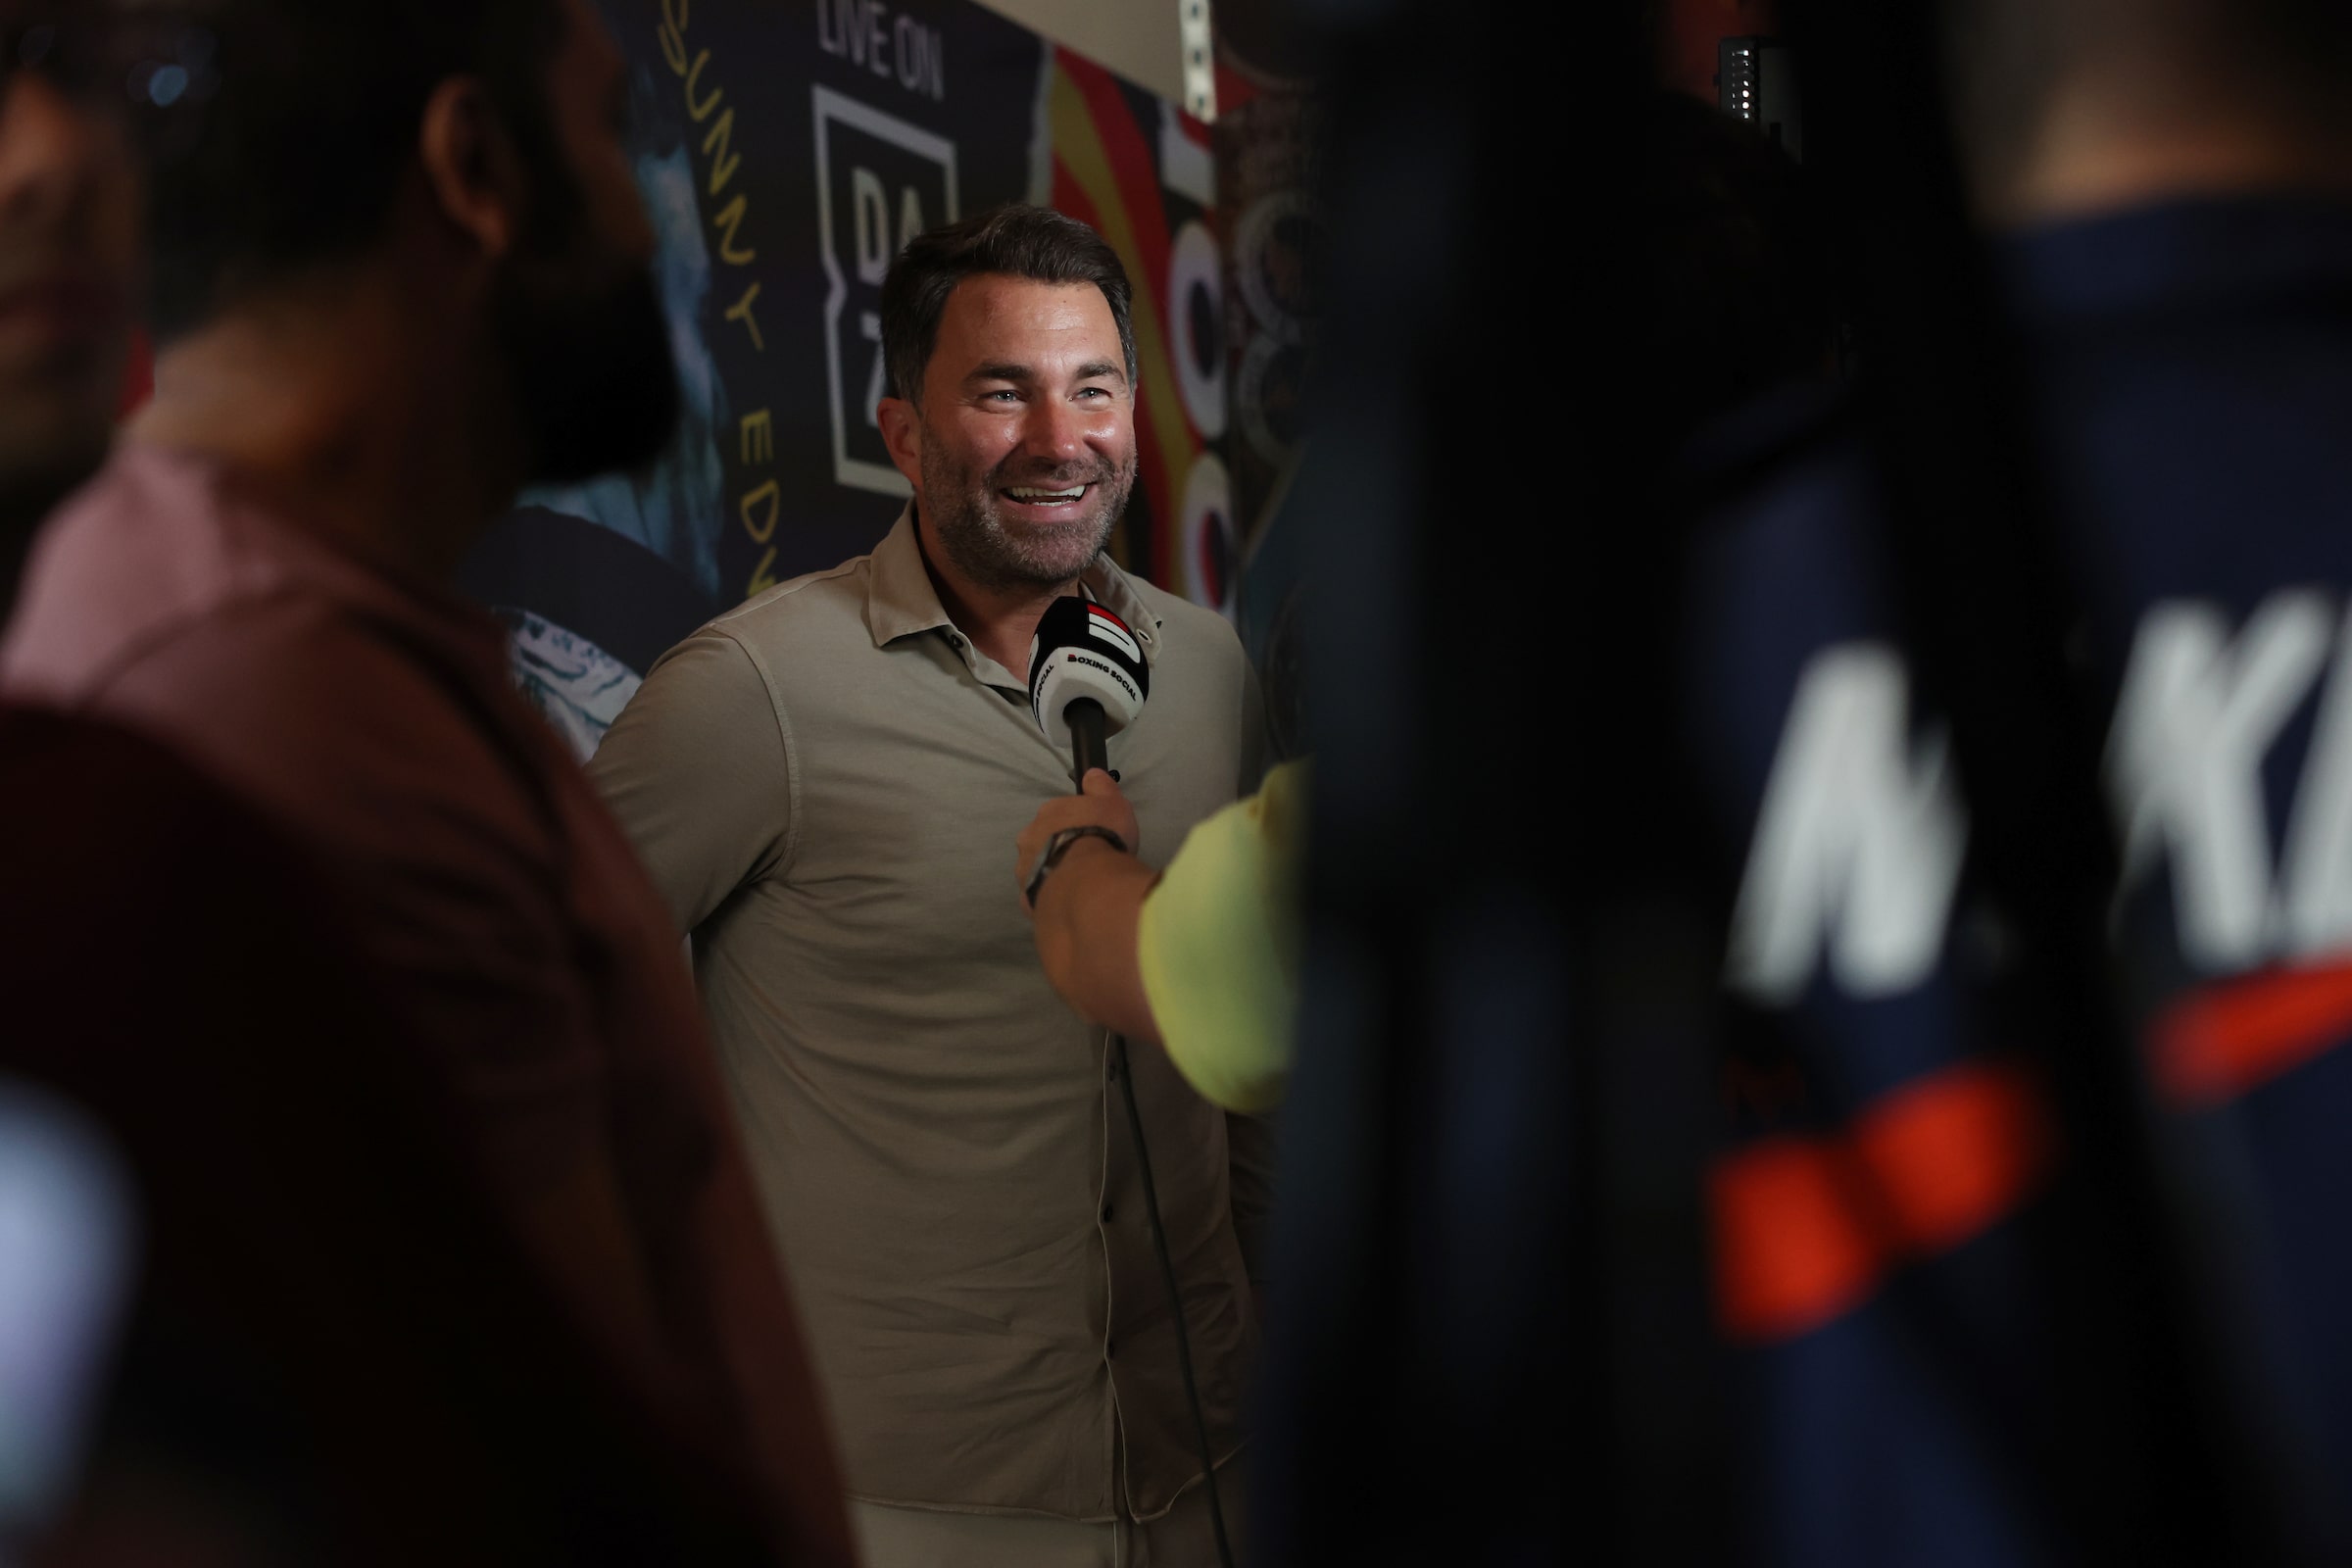 Eddie Hearn calls Fury "Desperate" following proposed fight rejection from Joshua